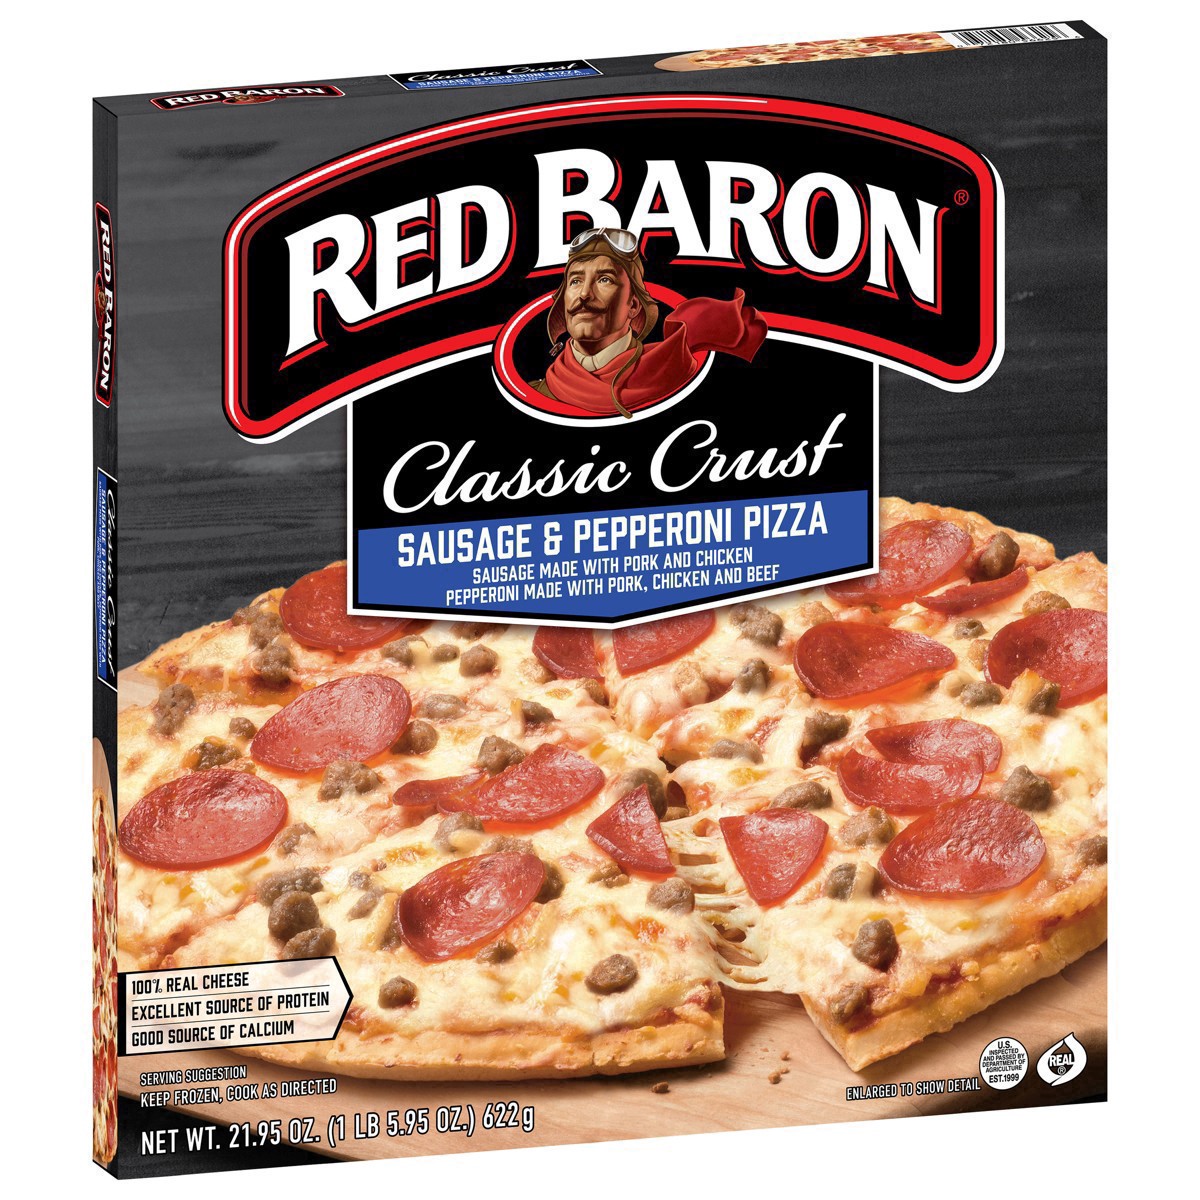 slide 25 of 49, Red Baron Frozen Pizza Classic Crust Sausage & Pepperoni, 21.95 oz